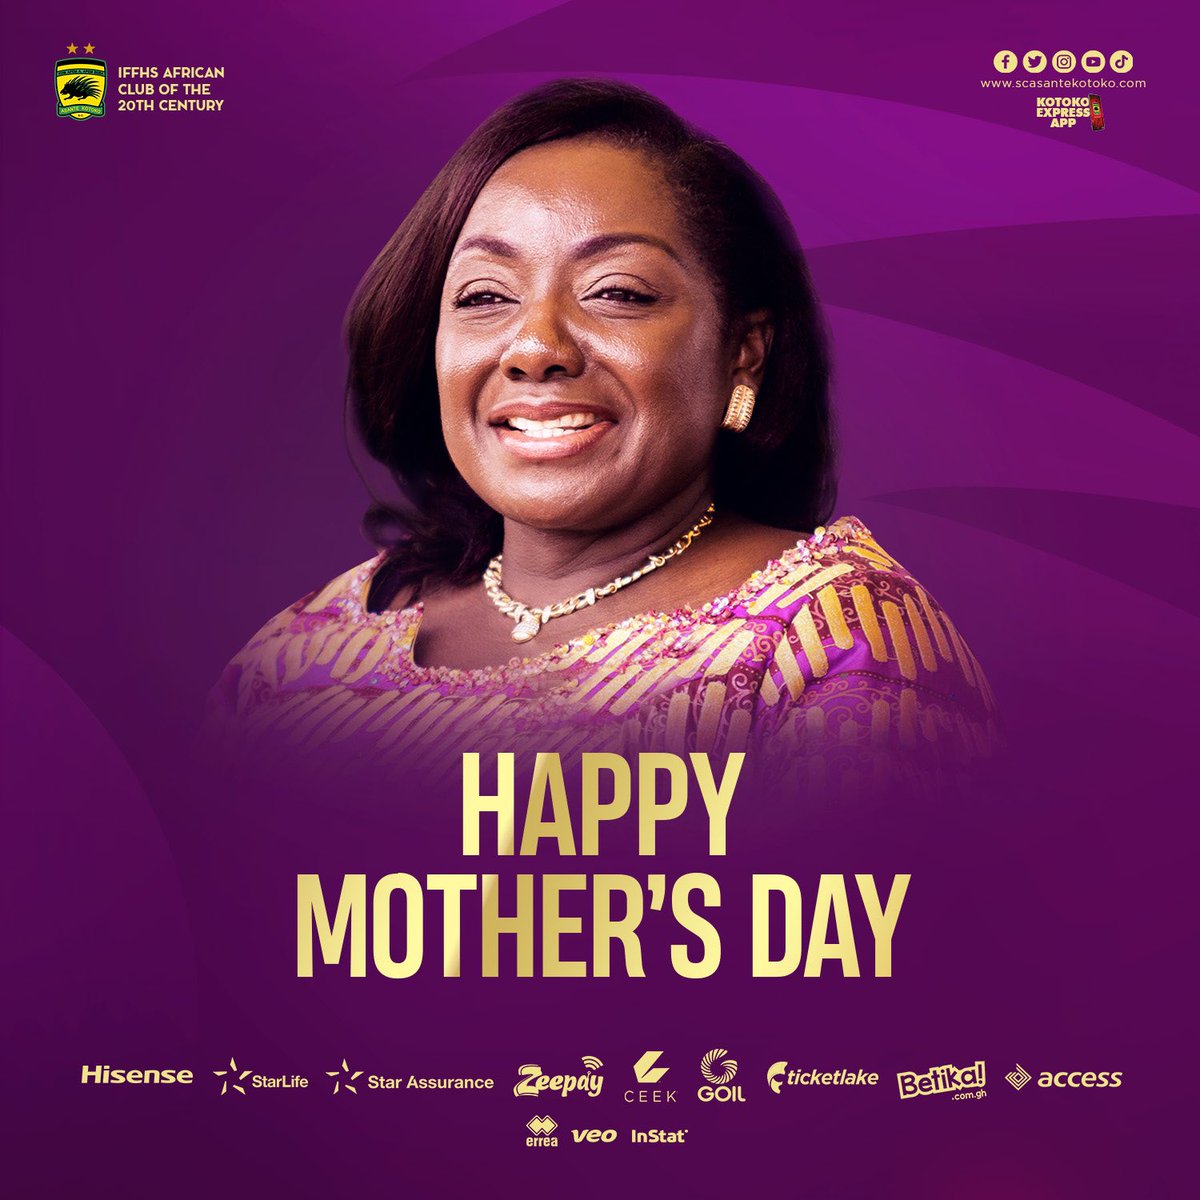 Fabulous ❤️ to all mothers 🙏🏾

#AKSC #HappyMothersDay2022